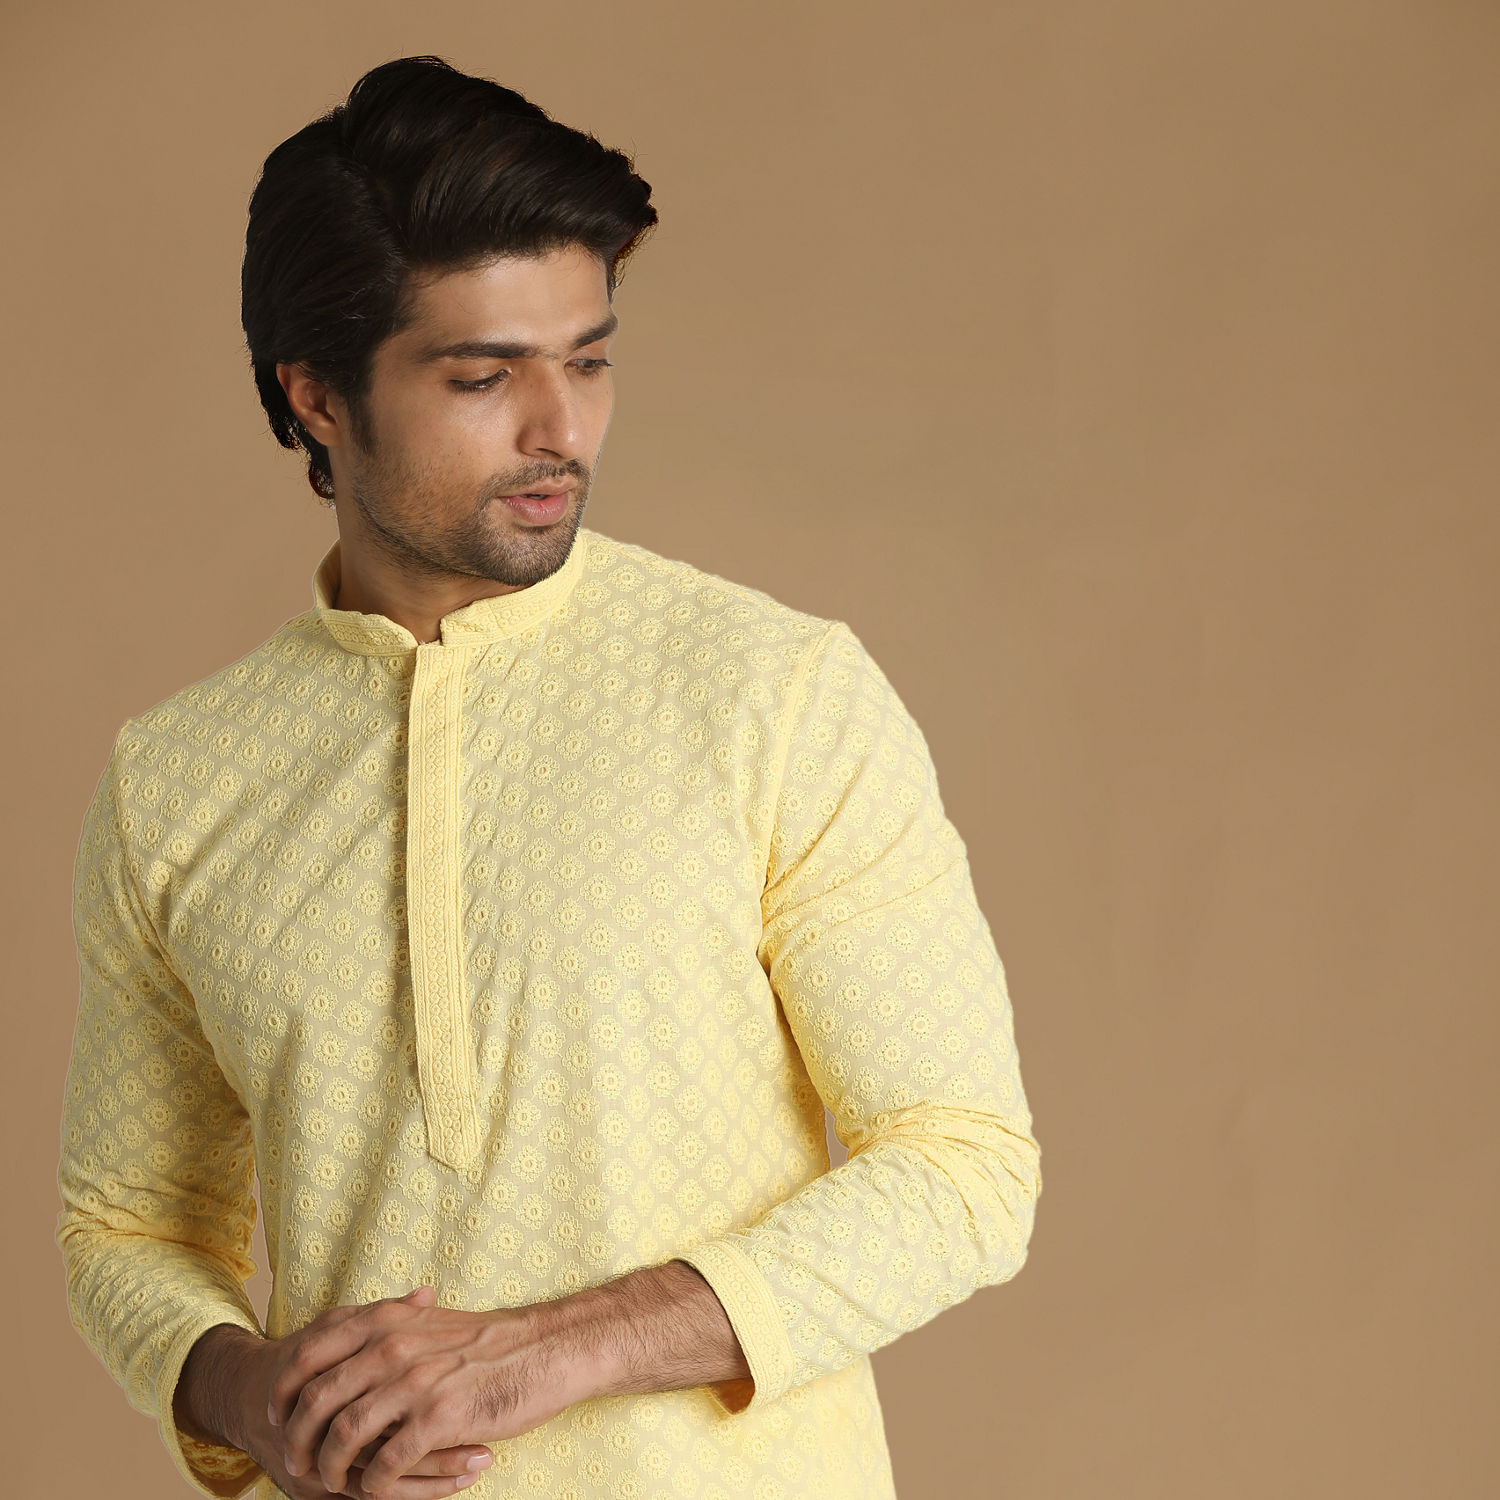 5 Attire That Can Be The Perfect Haldi Dress For Men